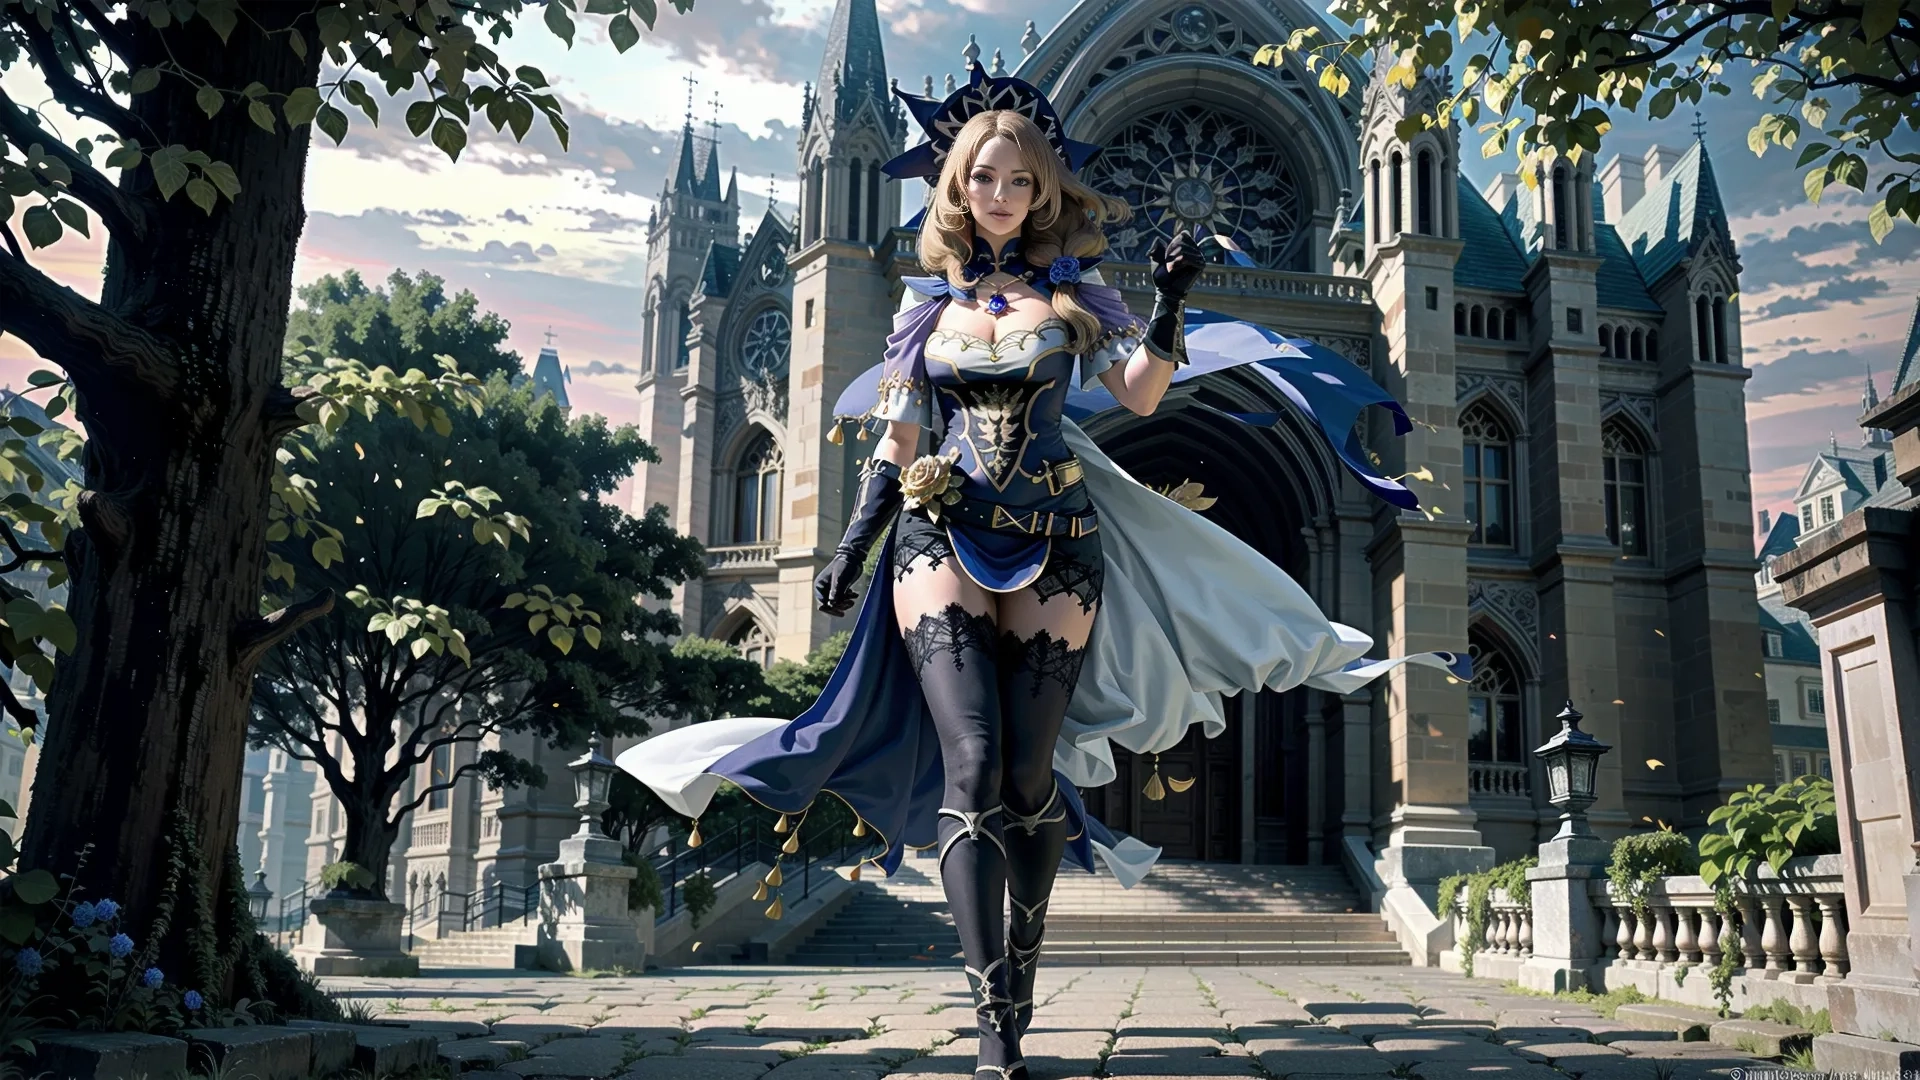 a woman in armor standing outside her home, on the ground in front of the gothic church in fantasy world, overlooking an alley entrance
